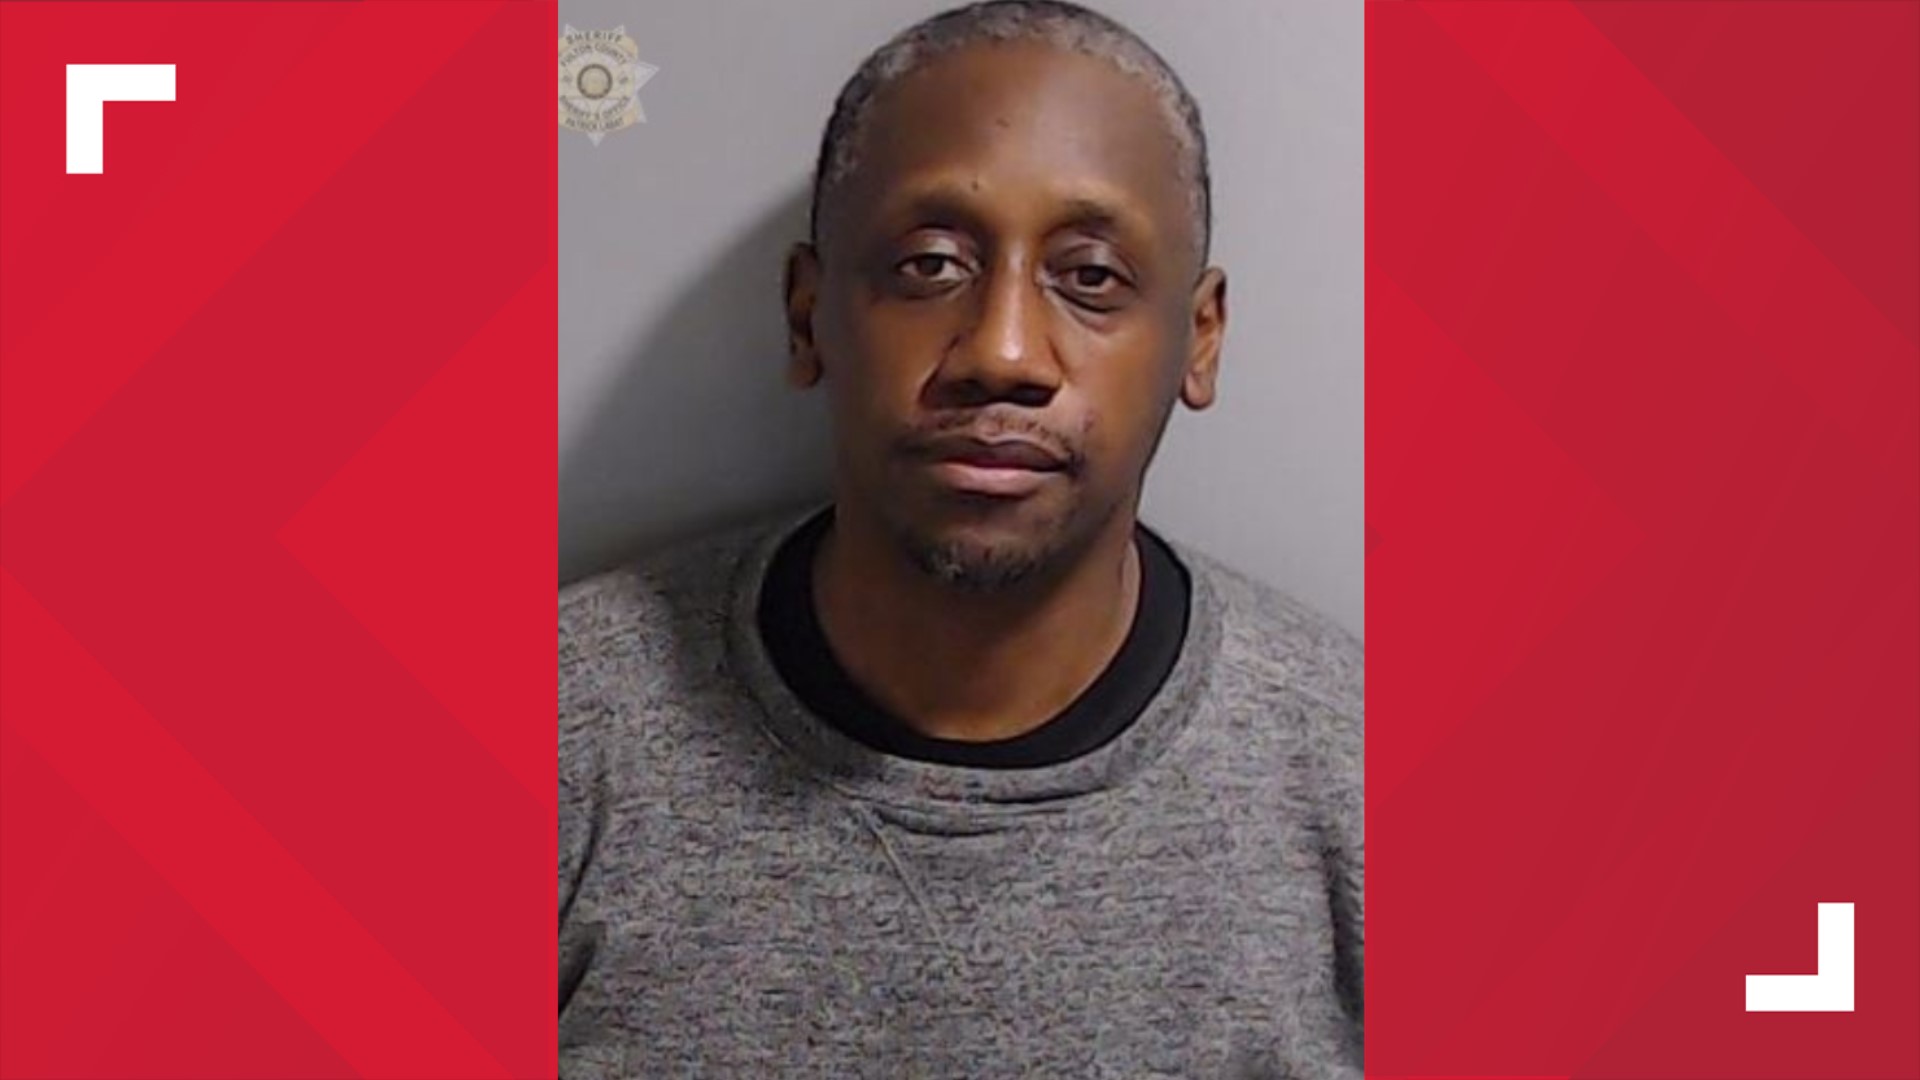 Zulu was initially described as a victim stemming from a June shooting outside a Buckhead strip mall that left one dead, but is now being charged with murder.